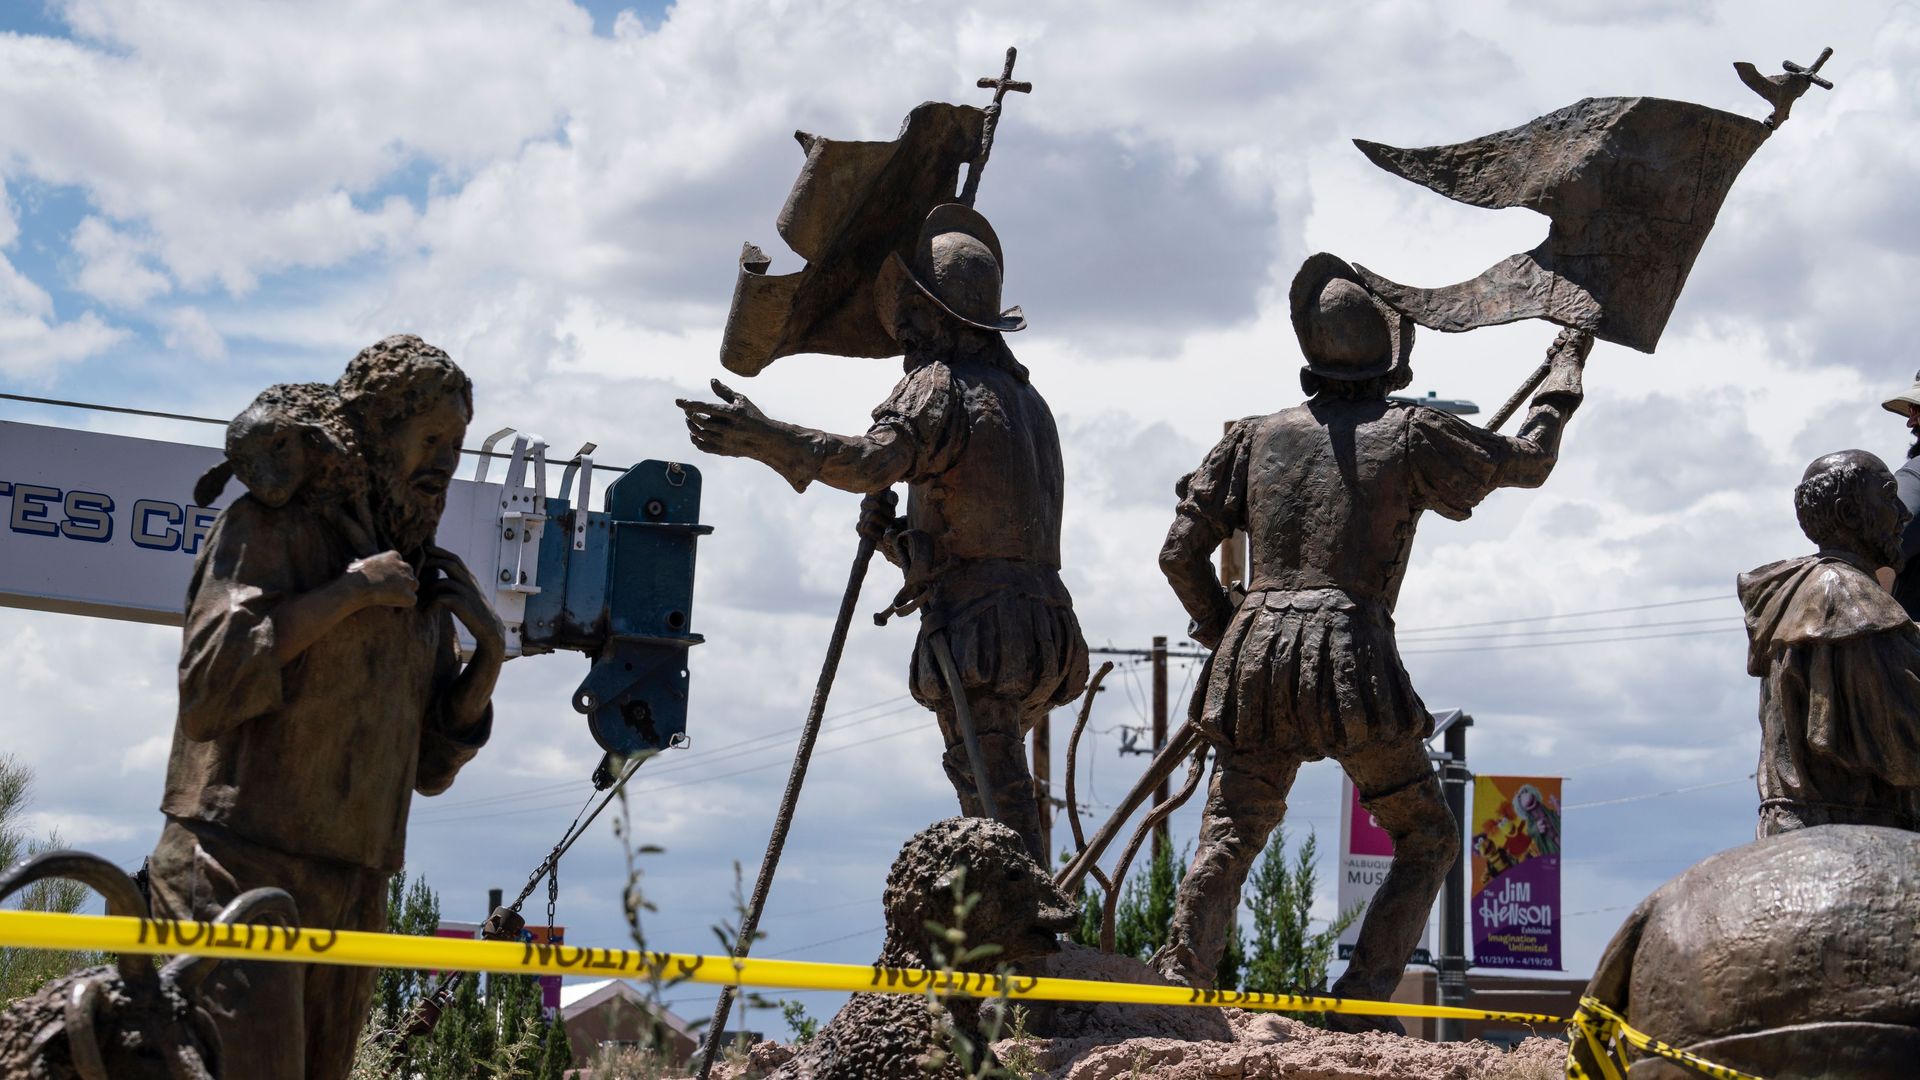 A sculpture of Juan de Onate's group of settlers colonizing New Mexico is pictured as workers for the City of Albuquerque remove a sculpture